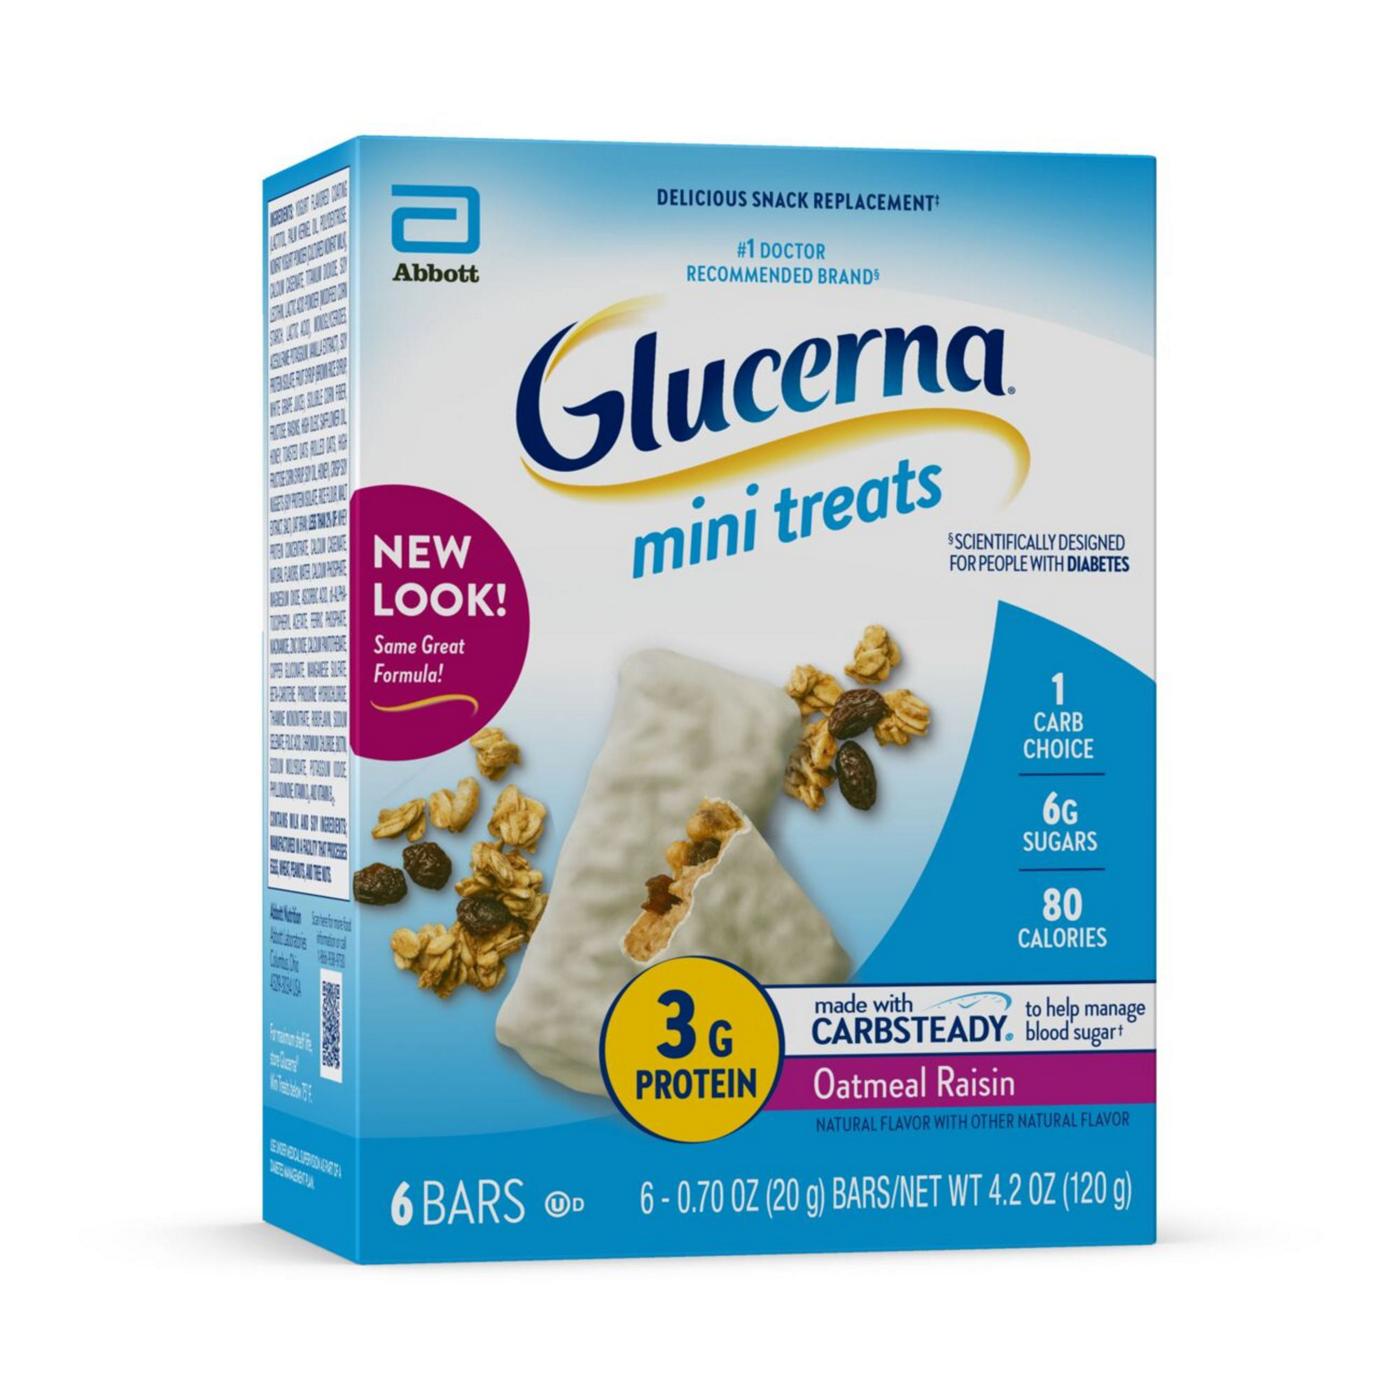 Glucerna Mini Treats, Diabetic Snack Replacement to Support Blood Sugar Management, Oatmeal Raisin; image 4 of 9